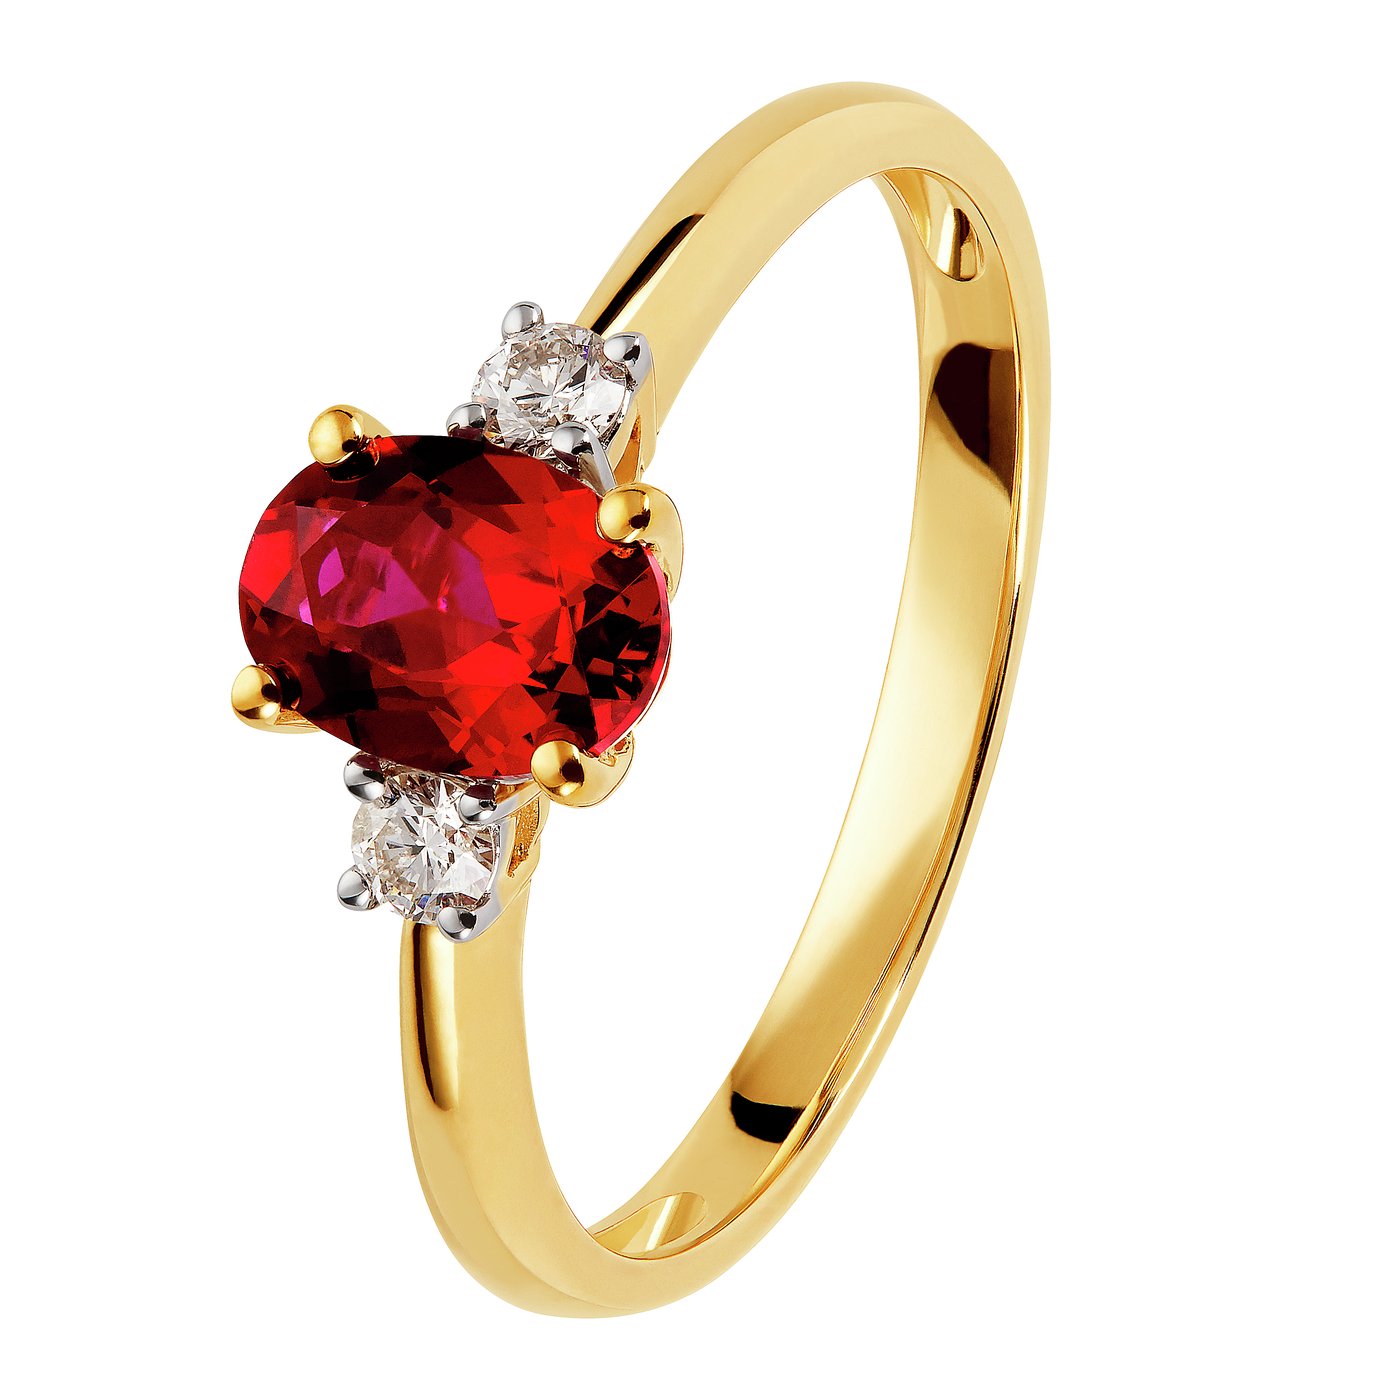 Revere 9ct Gold 0.10ct Diamond and Ruby Engagement Ring - I